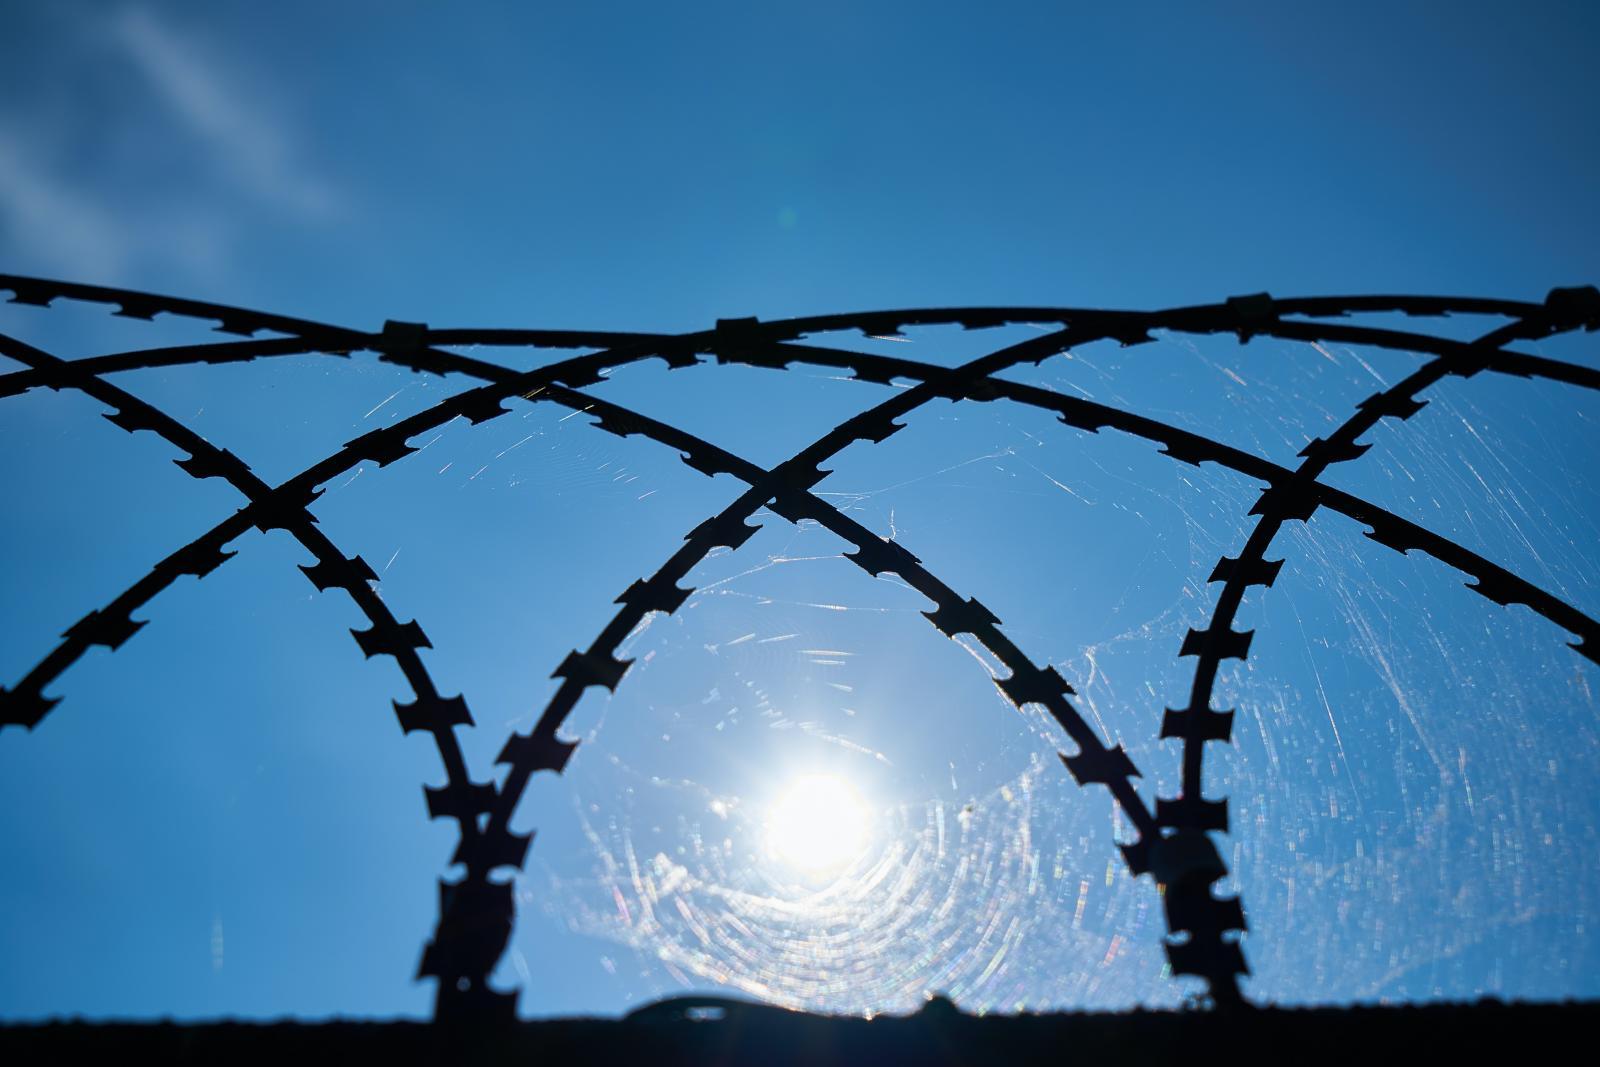 Barbed wire with the sun in the background.